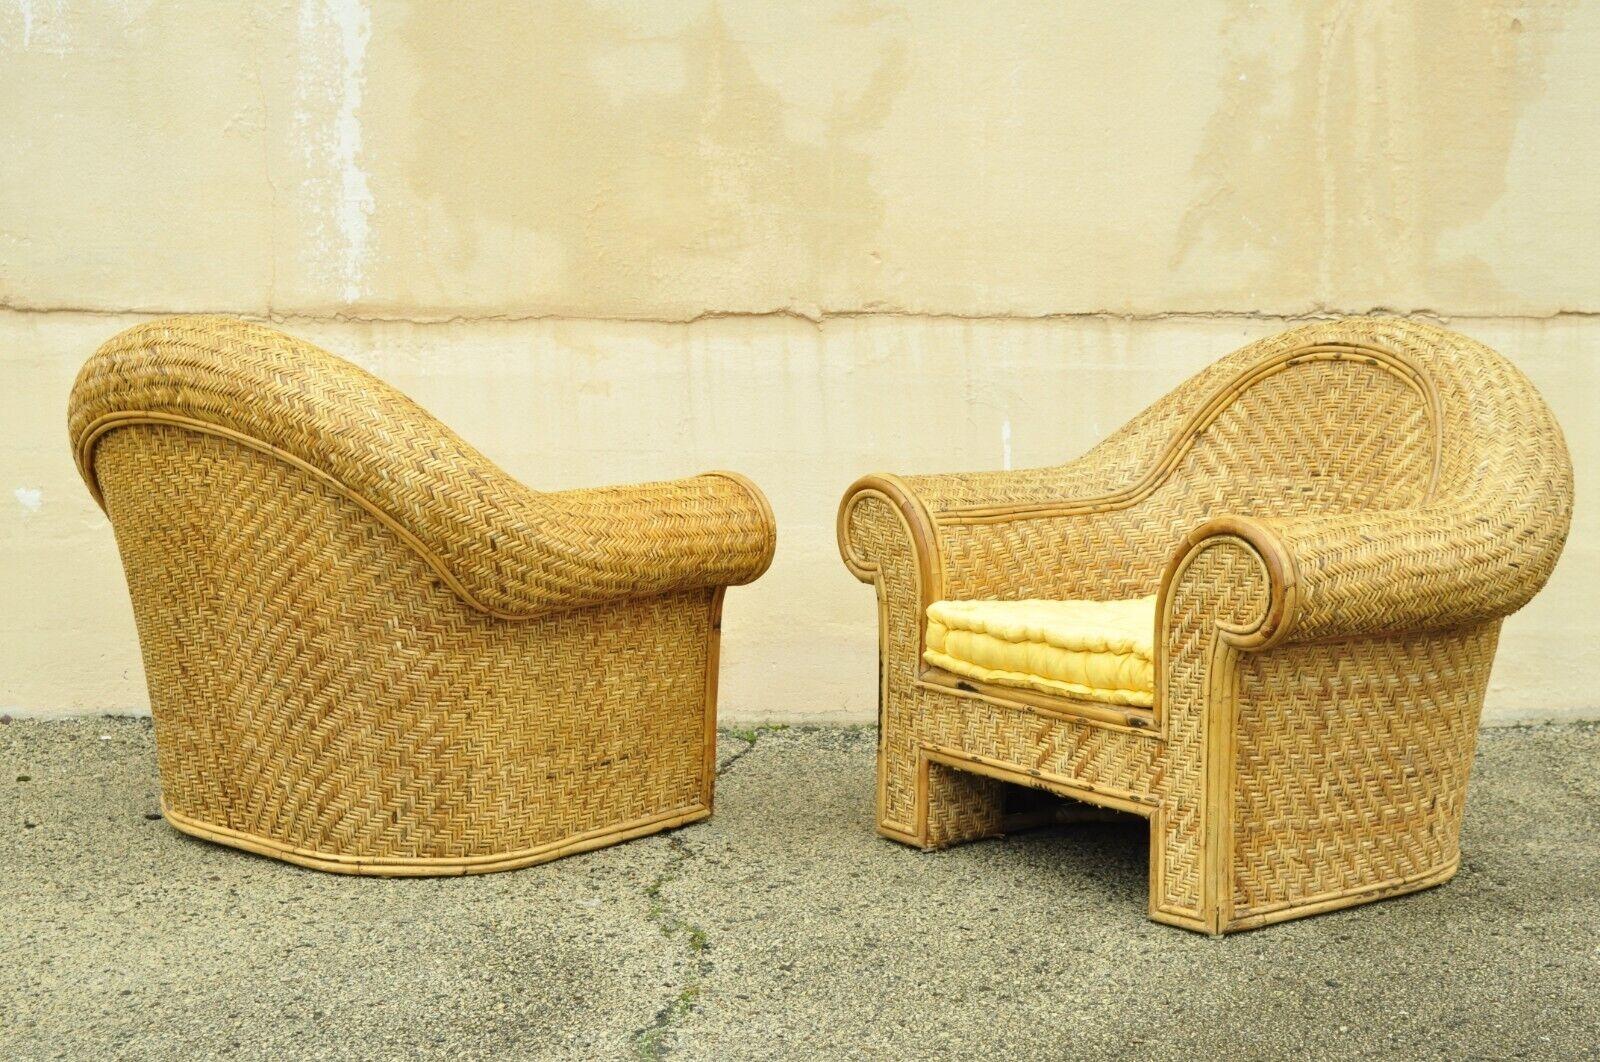 Hollywood Regency Ralph Lauren Attr. Large Woven Wicker Rattan Club Lounge Chairs - a Pair For Sale